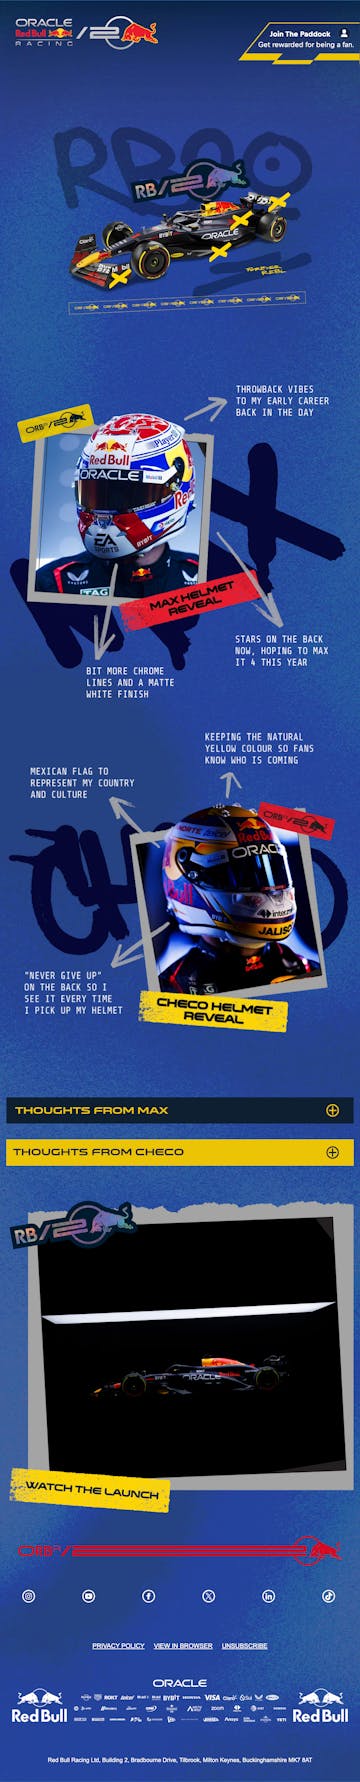 Oracle Red Bull Racing Interactive Email Design Thumbnail Preview